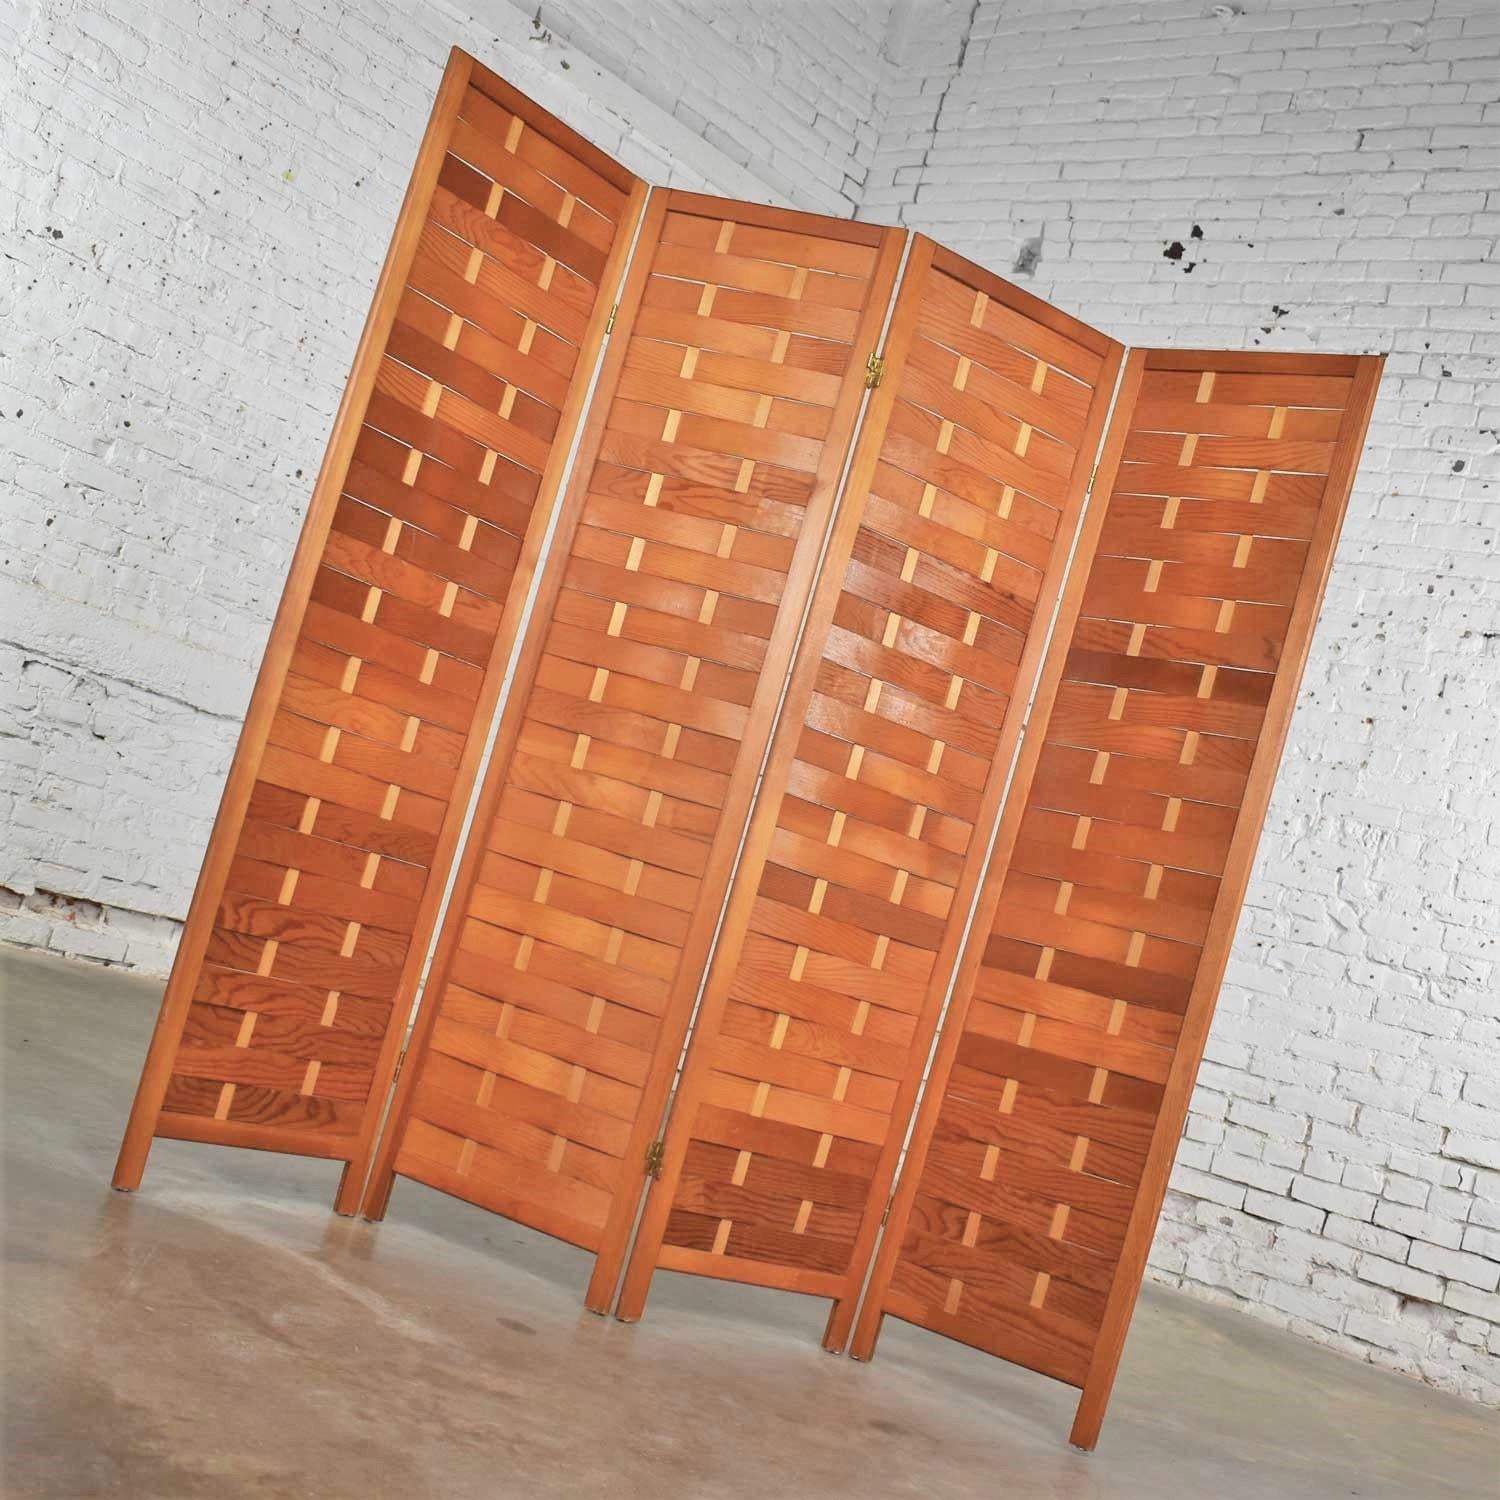 Handsome pine woven wood midcentury folding screen 4-panel room divider. It is in wonderful vintage condition. Please see photos, circa mid-20th century.

Just look at this gorgeous folding screen! It will look perfect wherever you use it and,